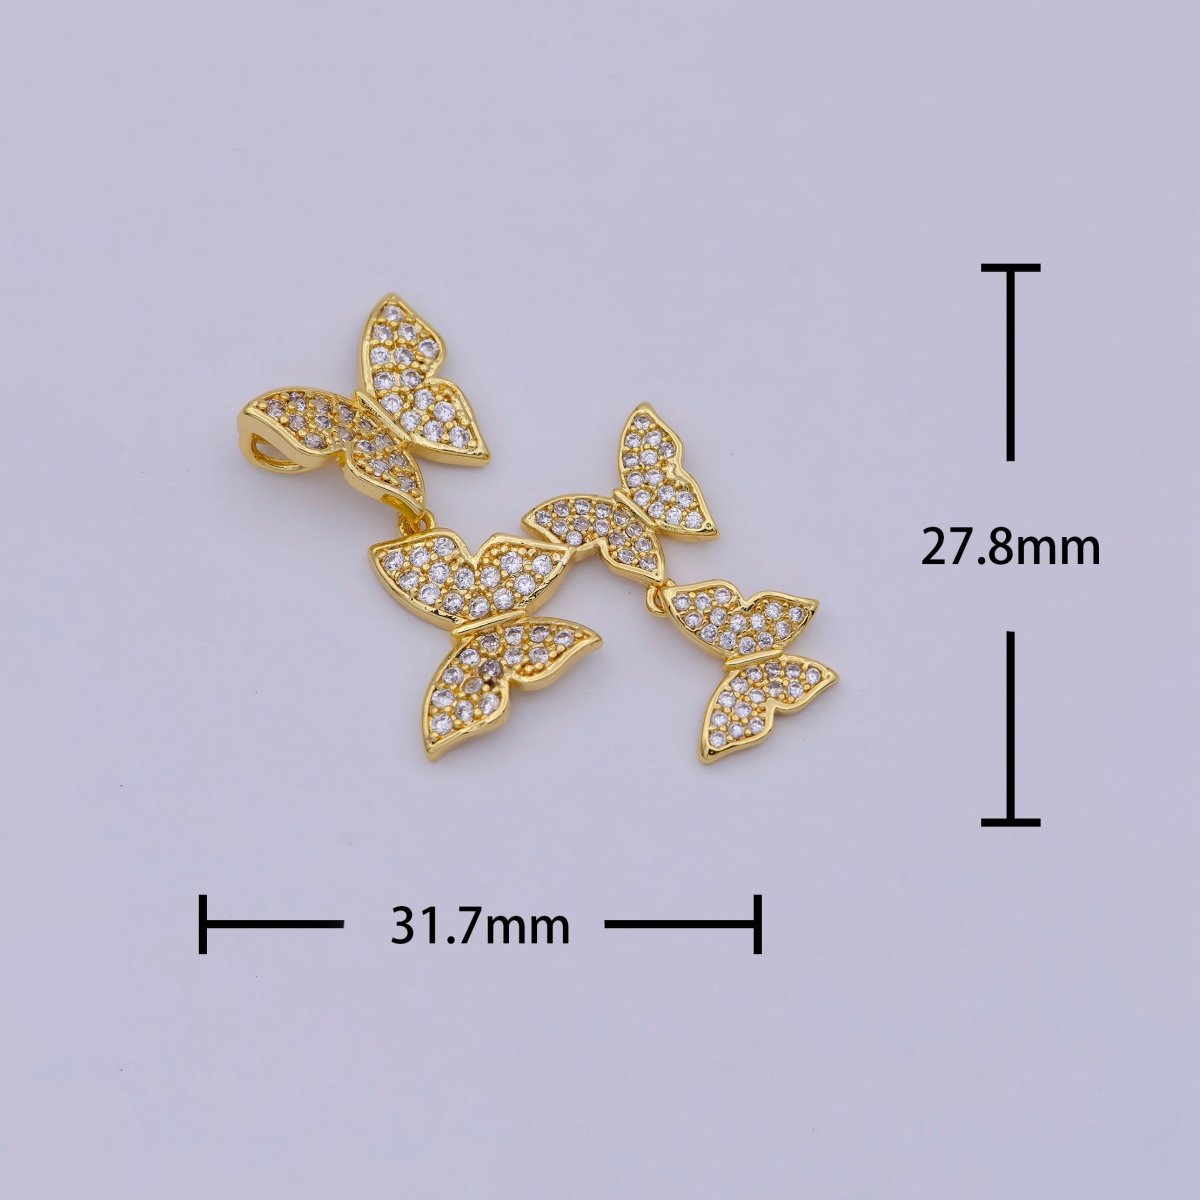 Micro Pave Butterfly Charm Dainty Monarch Butterfly Pendant in 18K Gold Filled Hoop Earring Necklace Pendant for Jewelry Making E-293 - DLUXCA